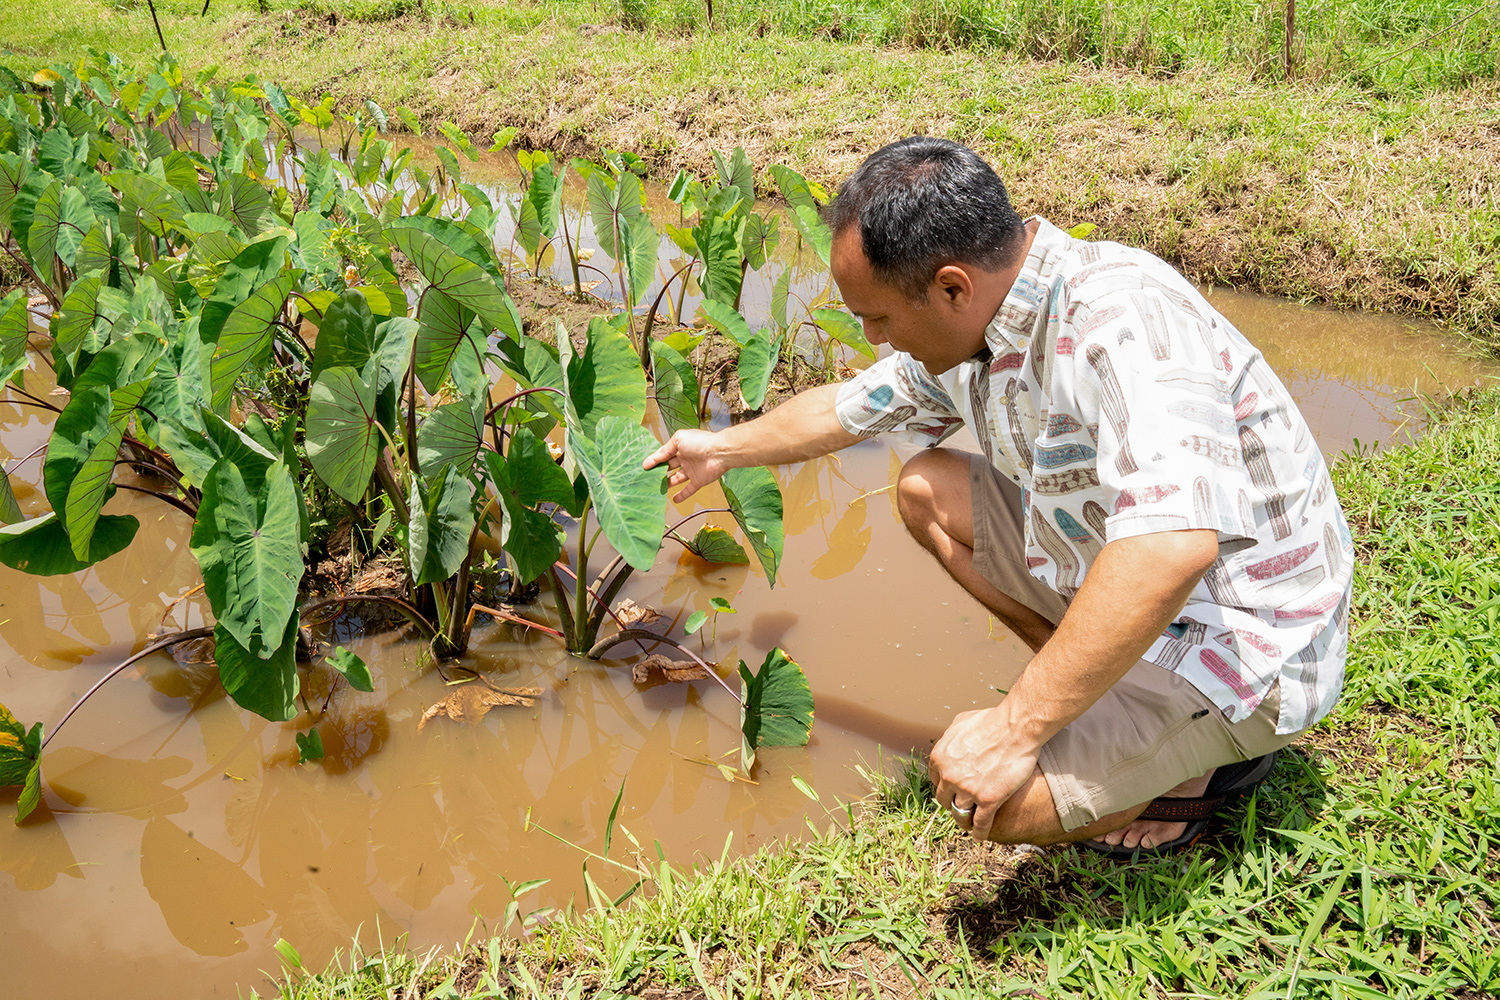 A man kneels next to an aquacultured taro field inspecting the large green leaves of the plant. 